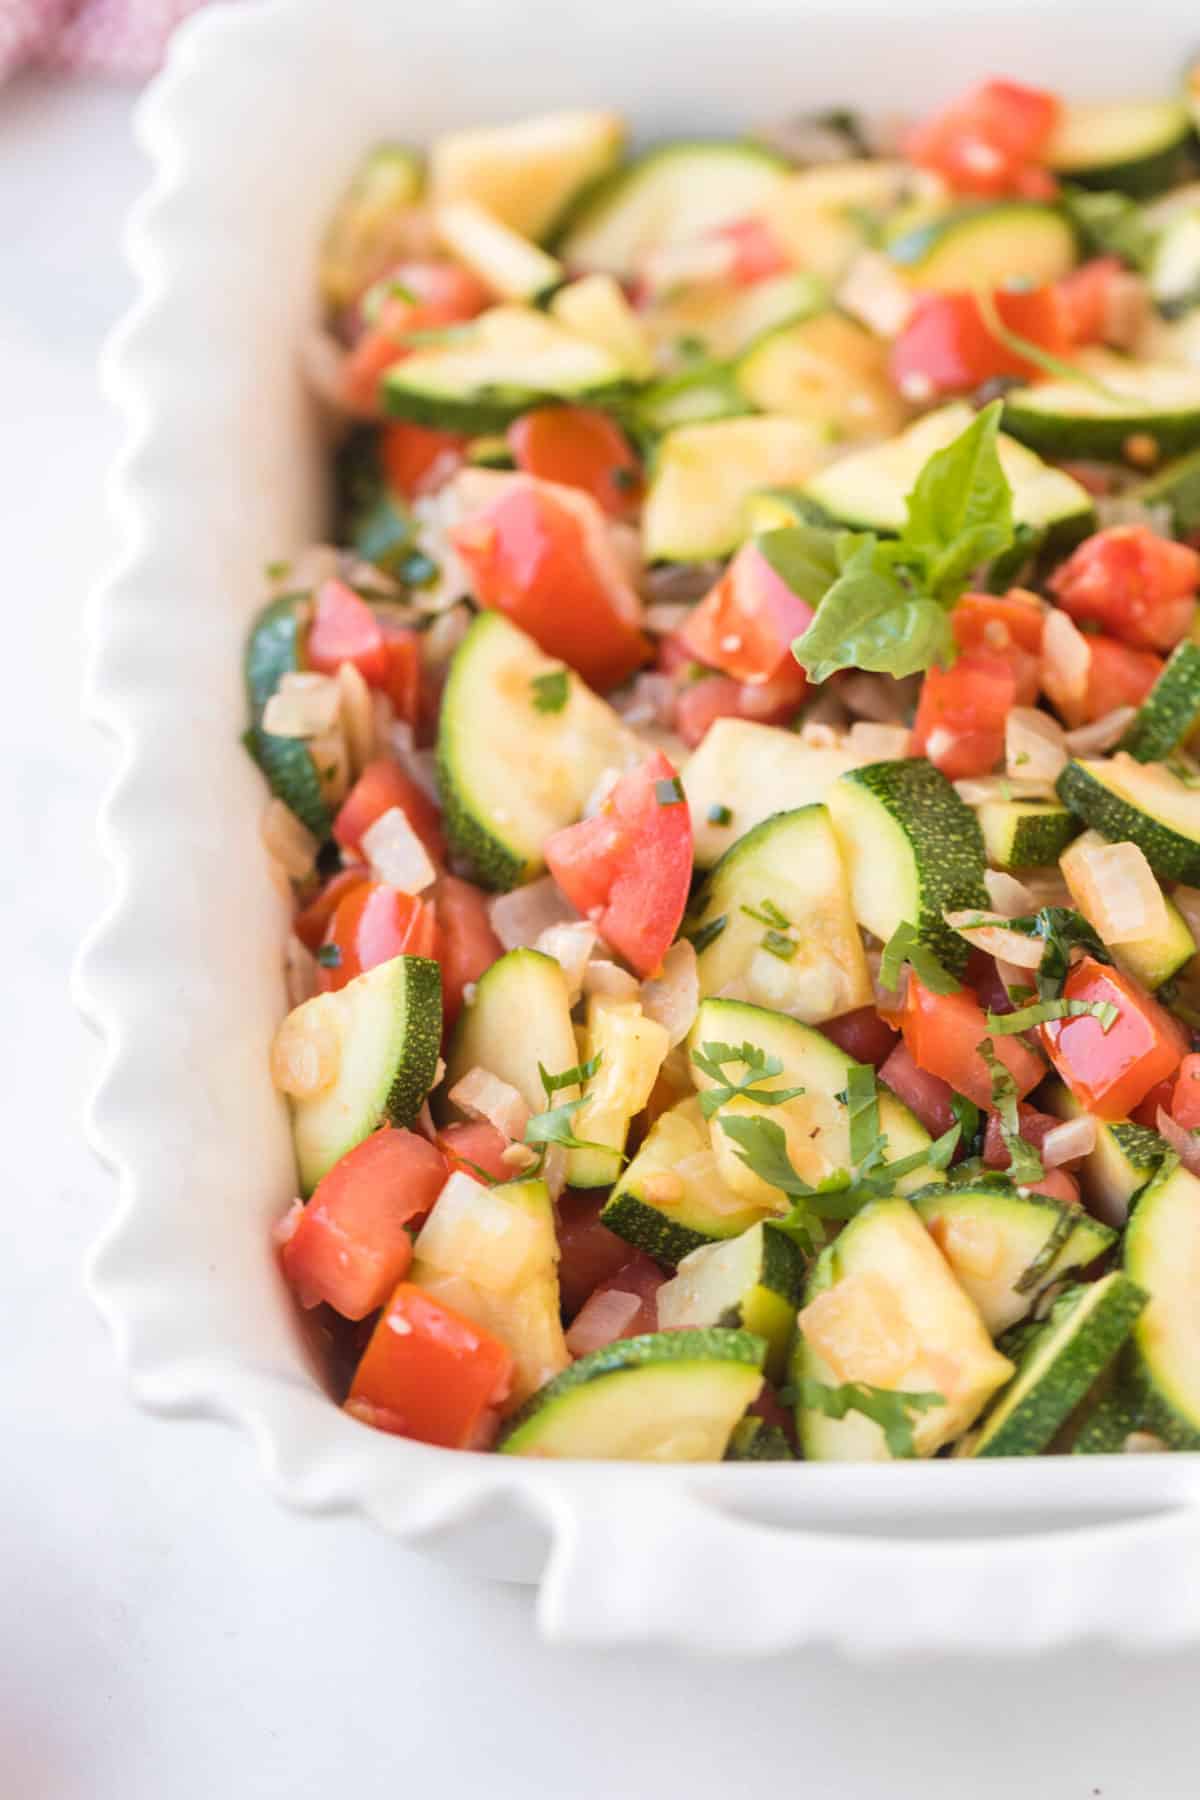 zucchini and tomato side dish in a baking pan.